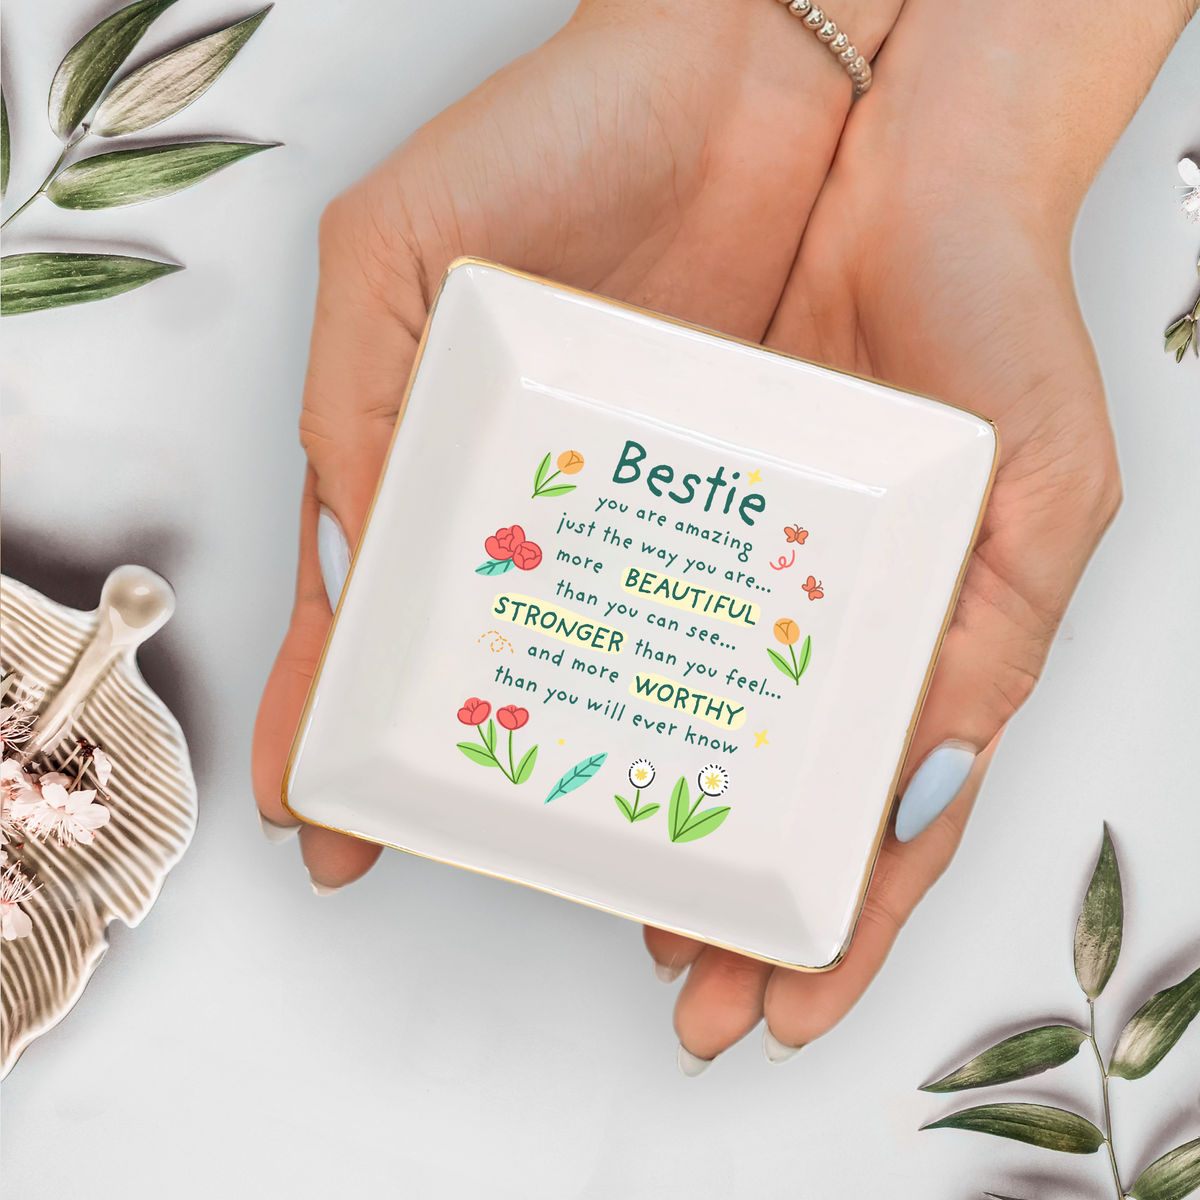 Personalized Jewelry Tray - Jewelry Tray - BESTIE You are Amazing Just the way you are... More Beautiful than you can see... Stronger than you feel... & more worthy than you will ever know - Bridesmaid Gifts, Birthday Gift for Her, Graduation Gift, Bridal Shower Gift, Gift for Friends_4